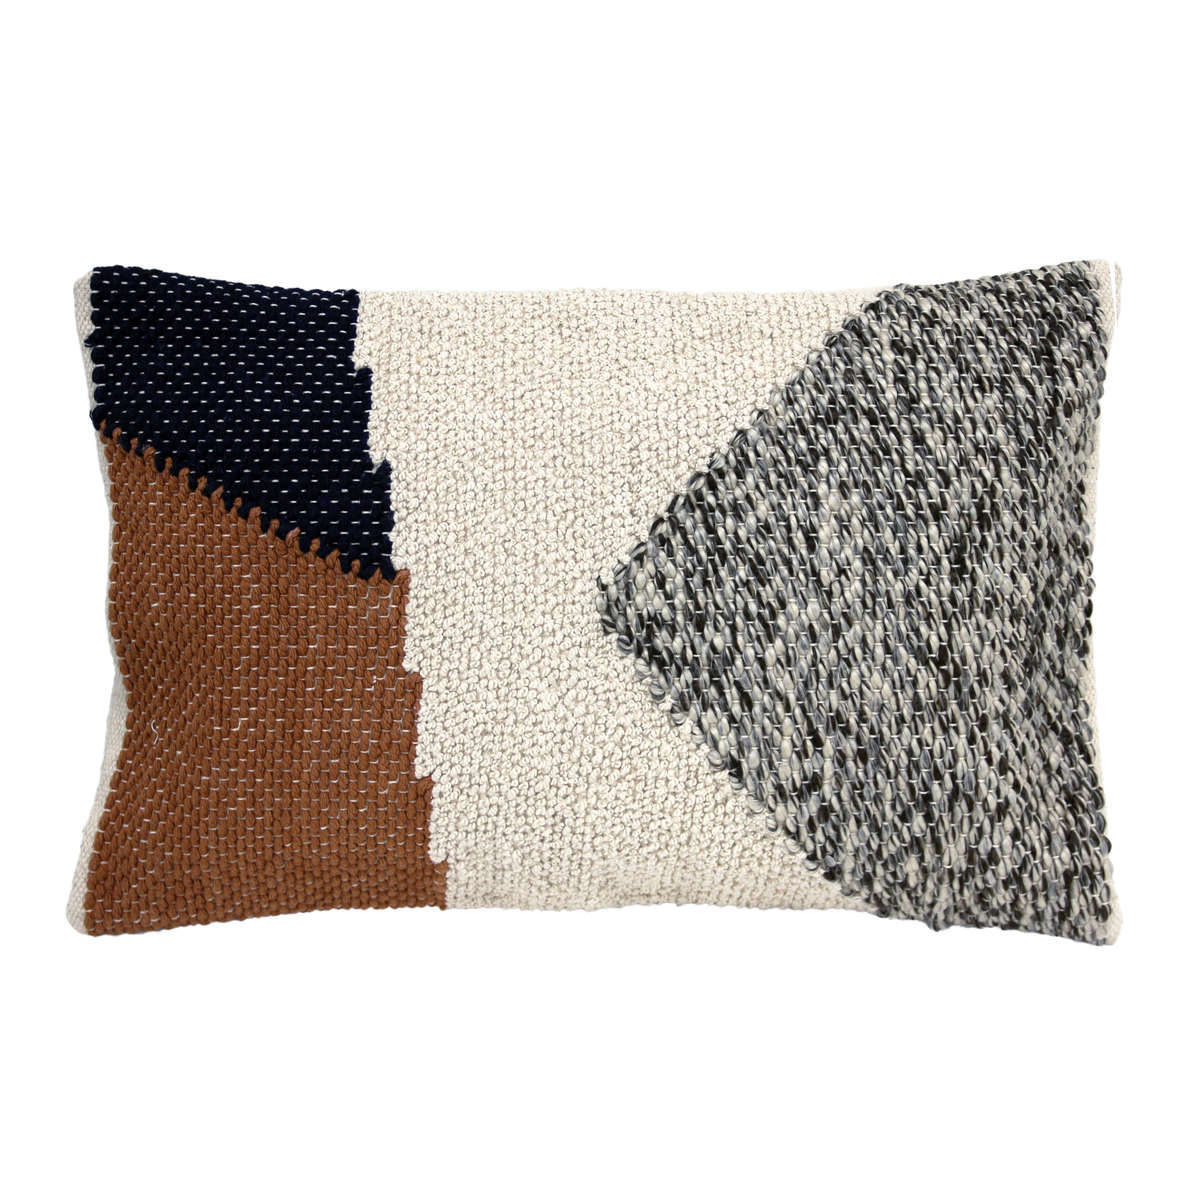 Tiered cushion with autumn colours made of cotton, HKliving, Eye on Design